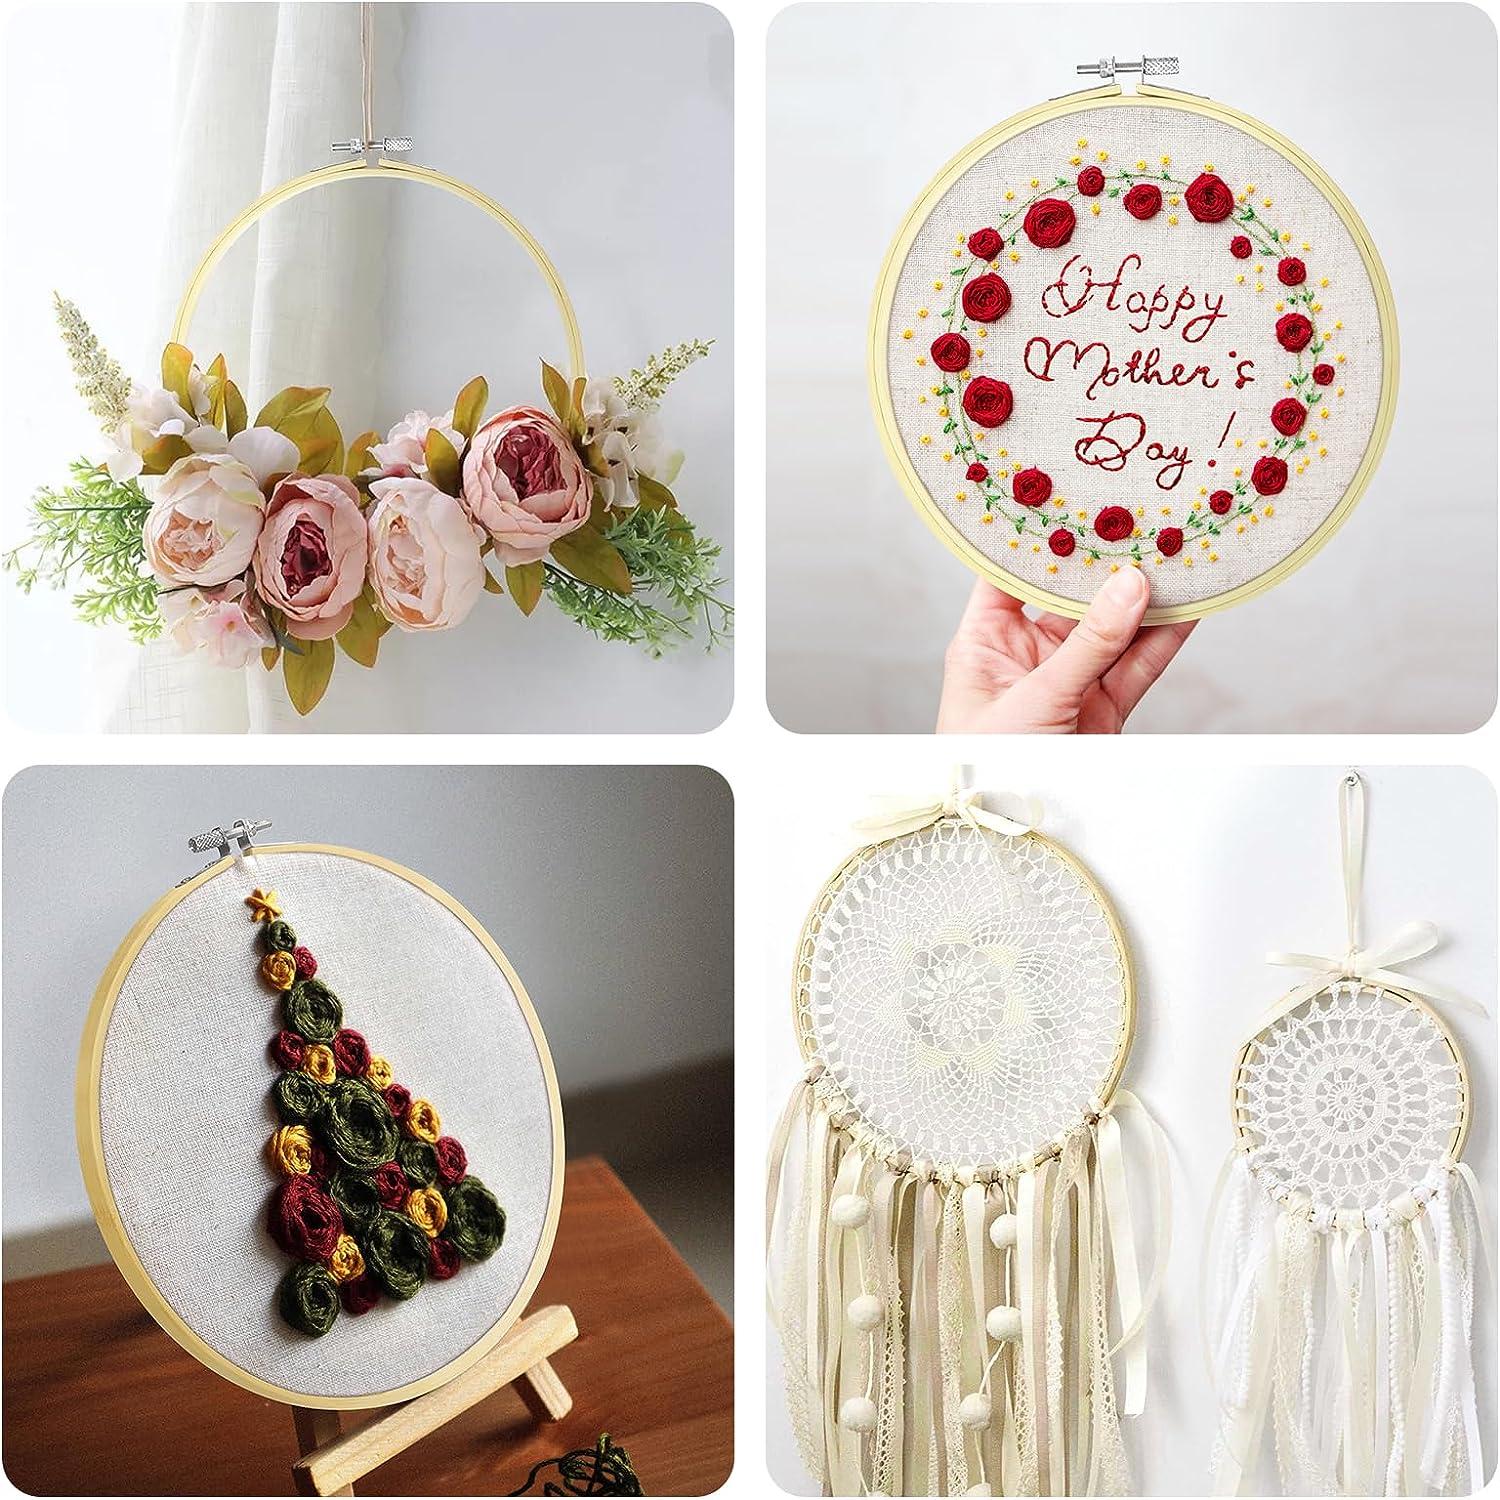 8 DIY Cross Stitch Hoop Embroidery Circle Sewing 8 inch